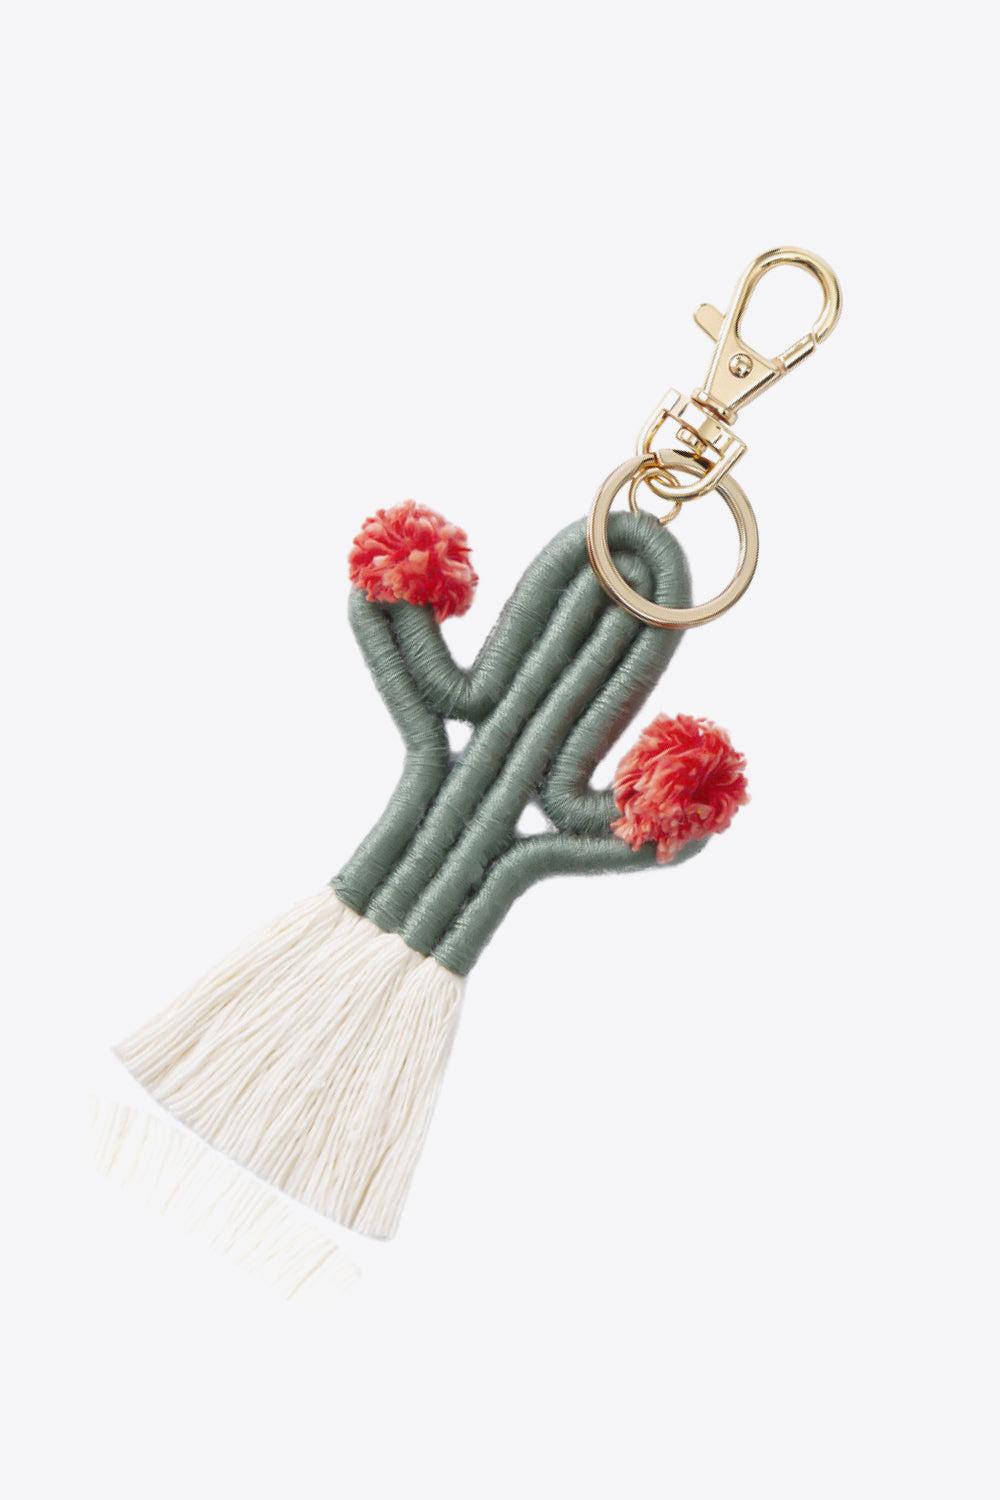 Trendsi Cupid Beauty Supplies Keychains Cactus Keychain with Fringe